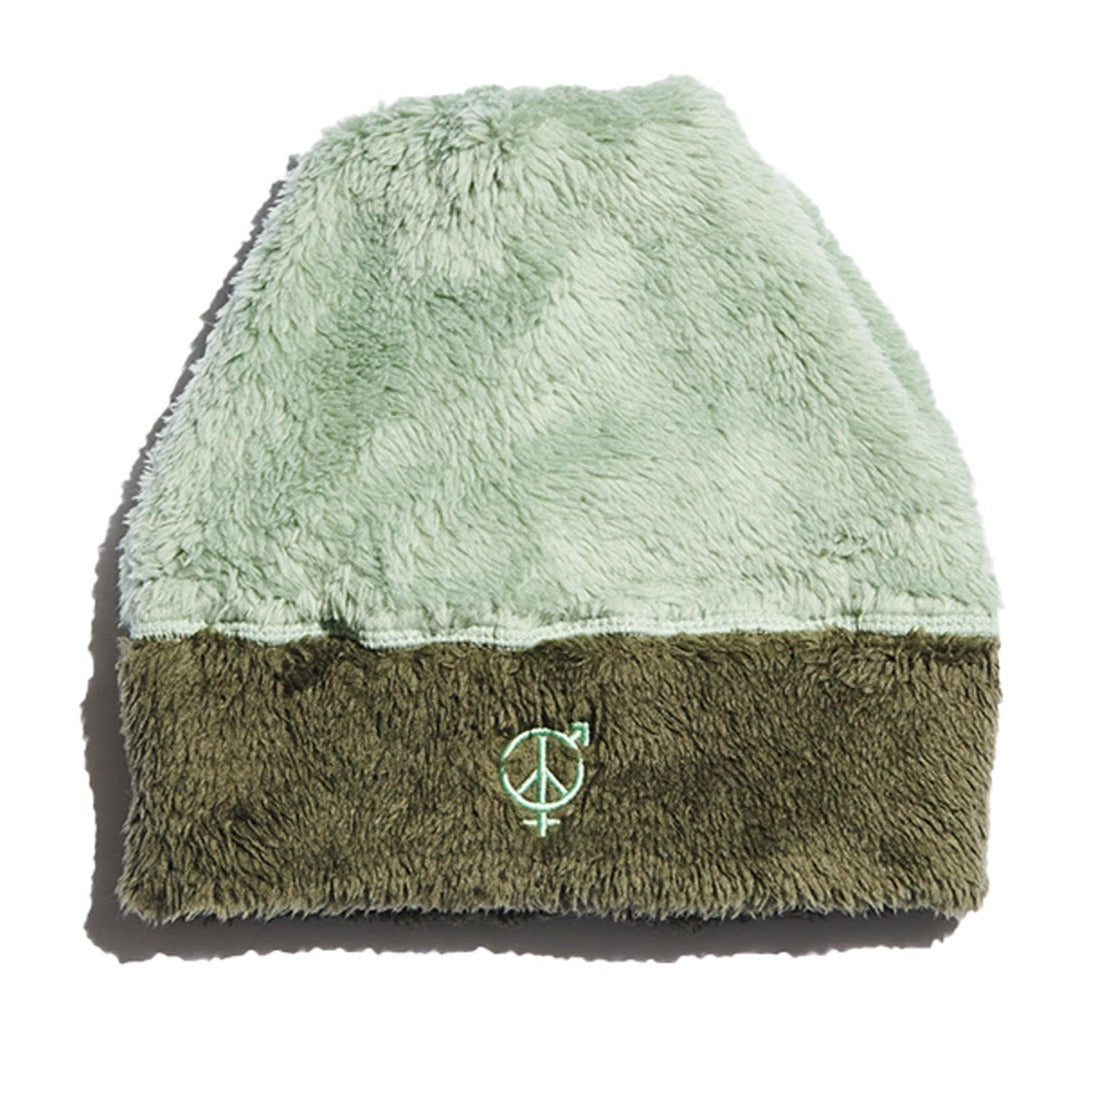 SexHippies Two-Tone Fleece Beanie Olive/Forest